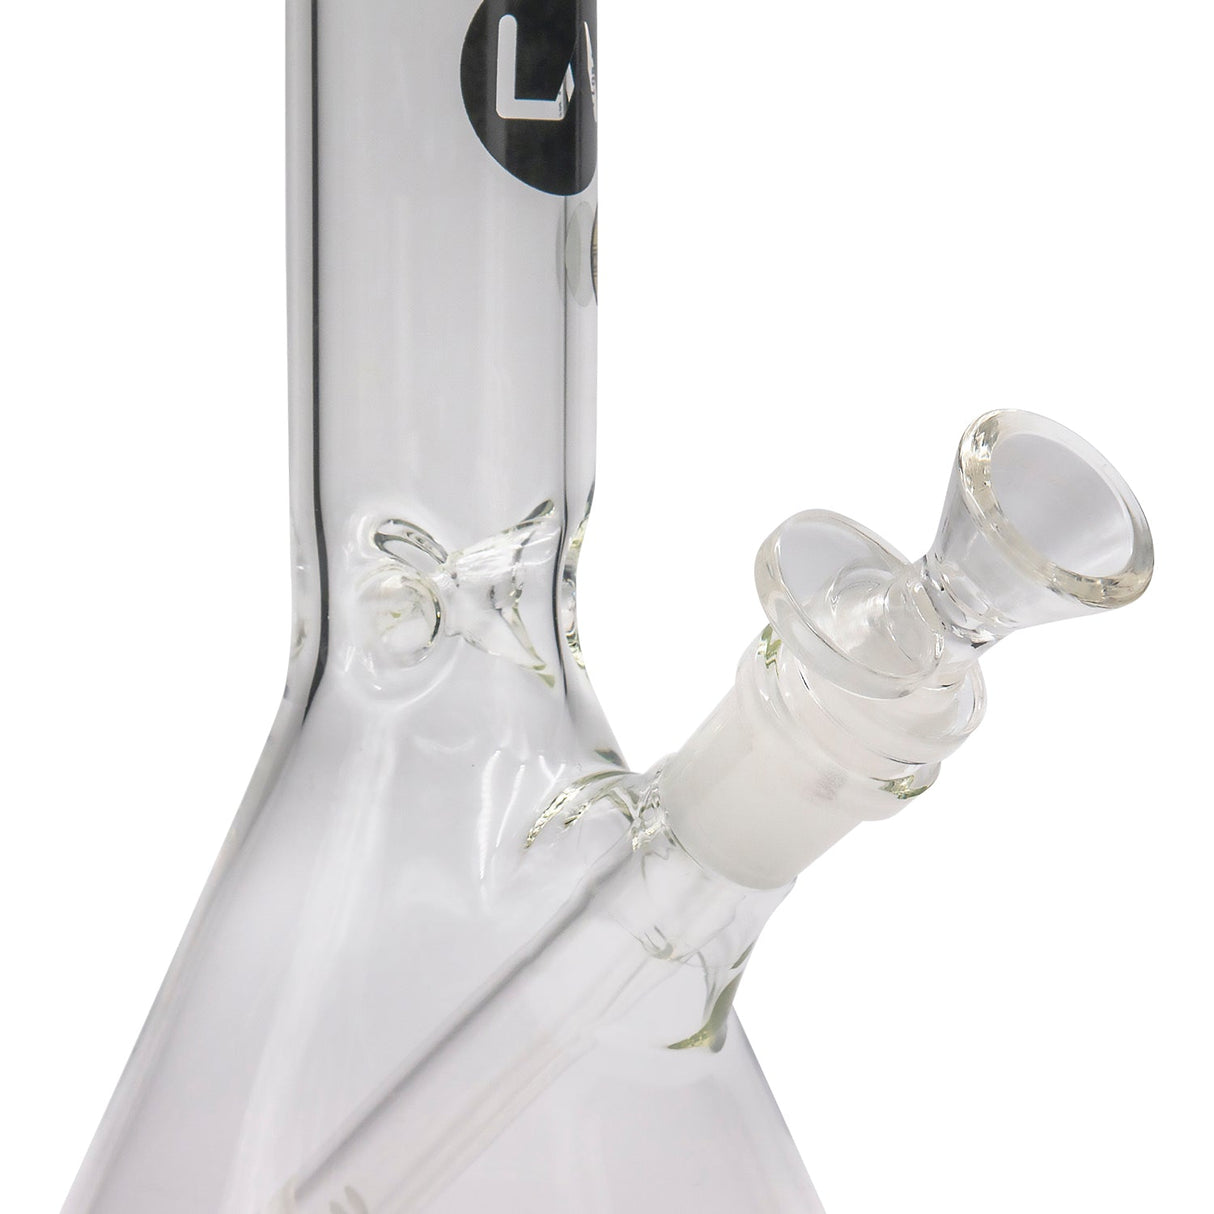 LA Pipes Basic Beaker Water Pipe clear borosilicate glass with 45-degree joint, side view